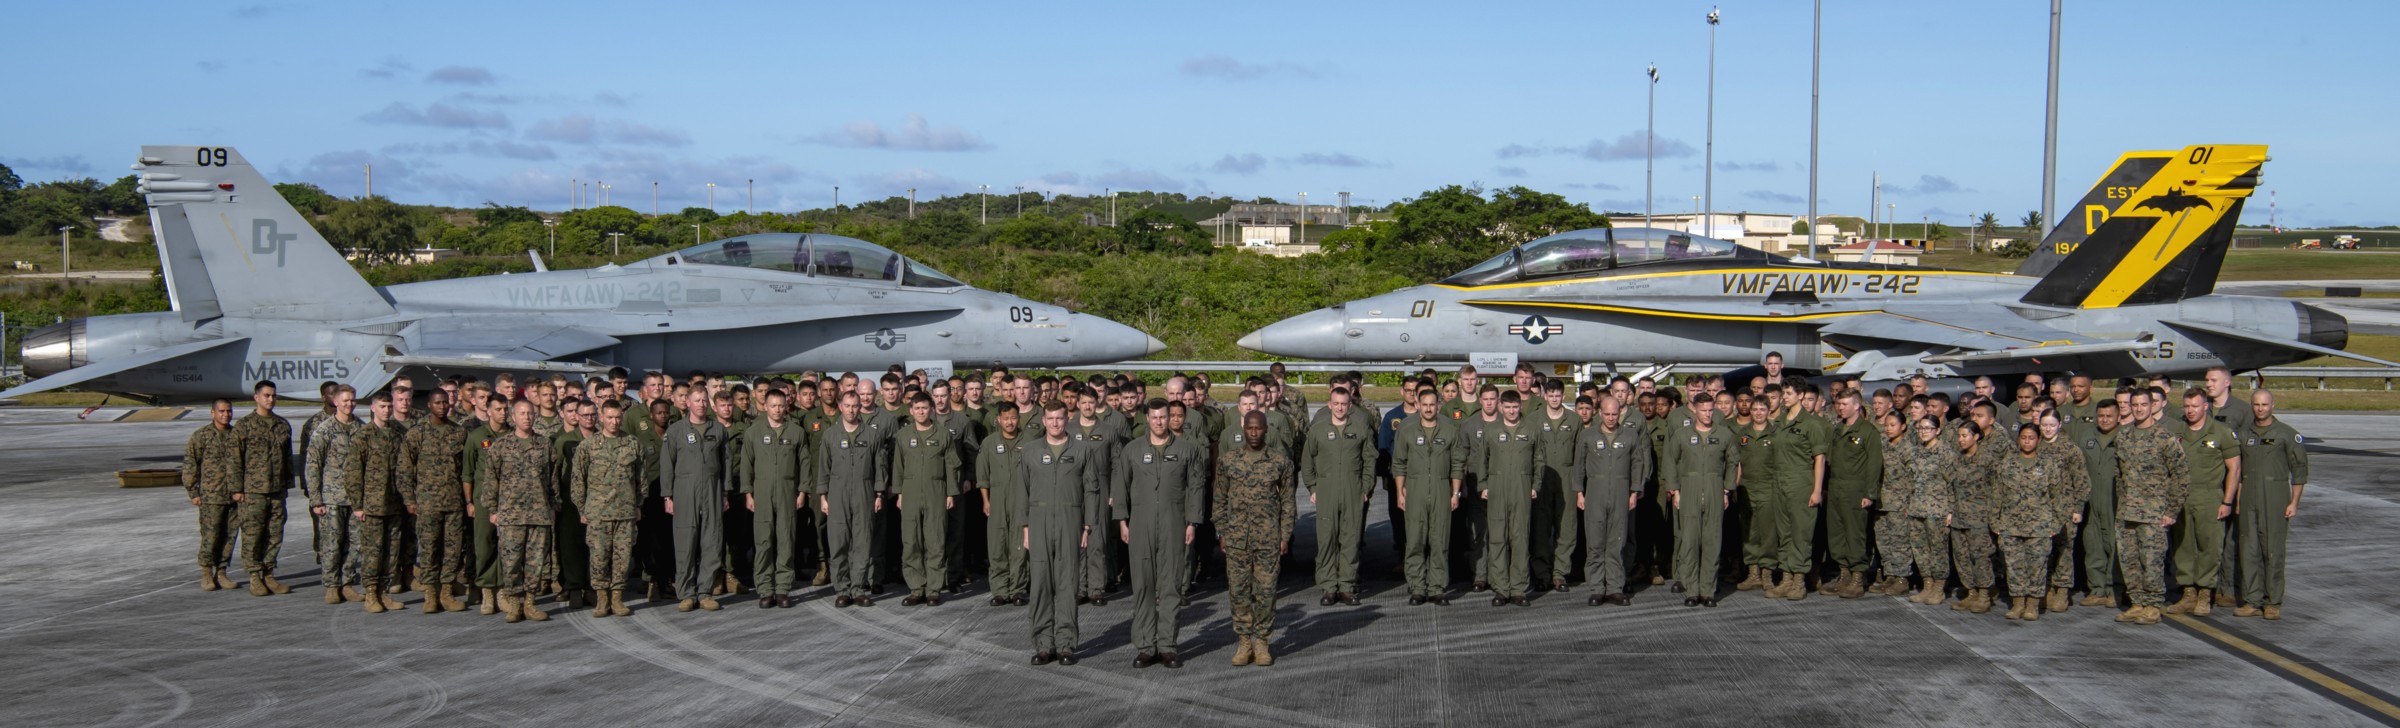 vmfa(aw)-242 bats marine all-weather fighter attack squadron usmc f/a-18d hornet 106 andersen afb guam